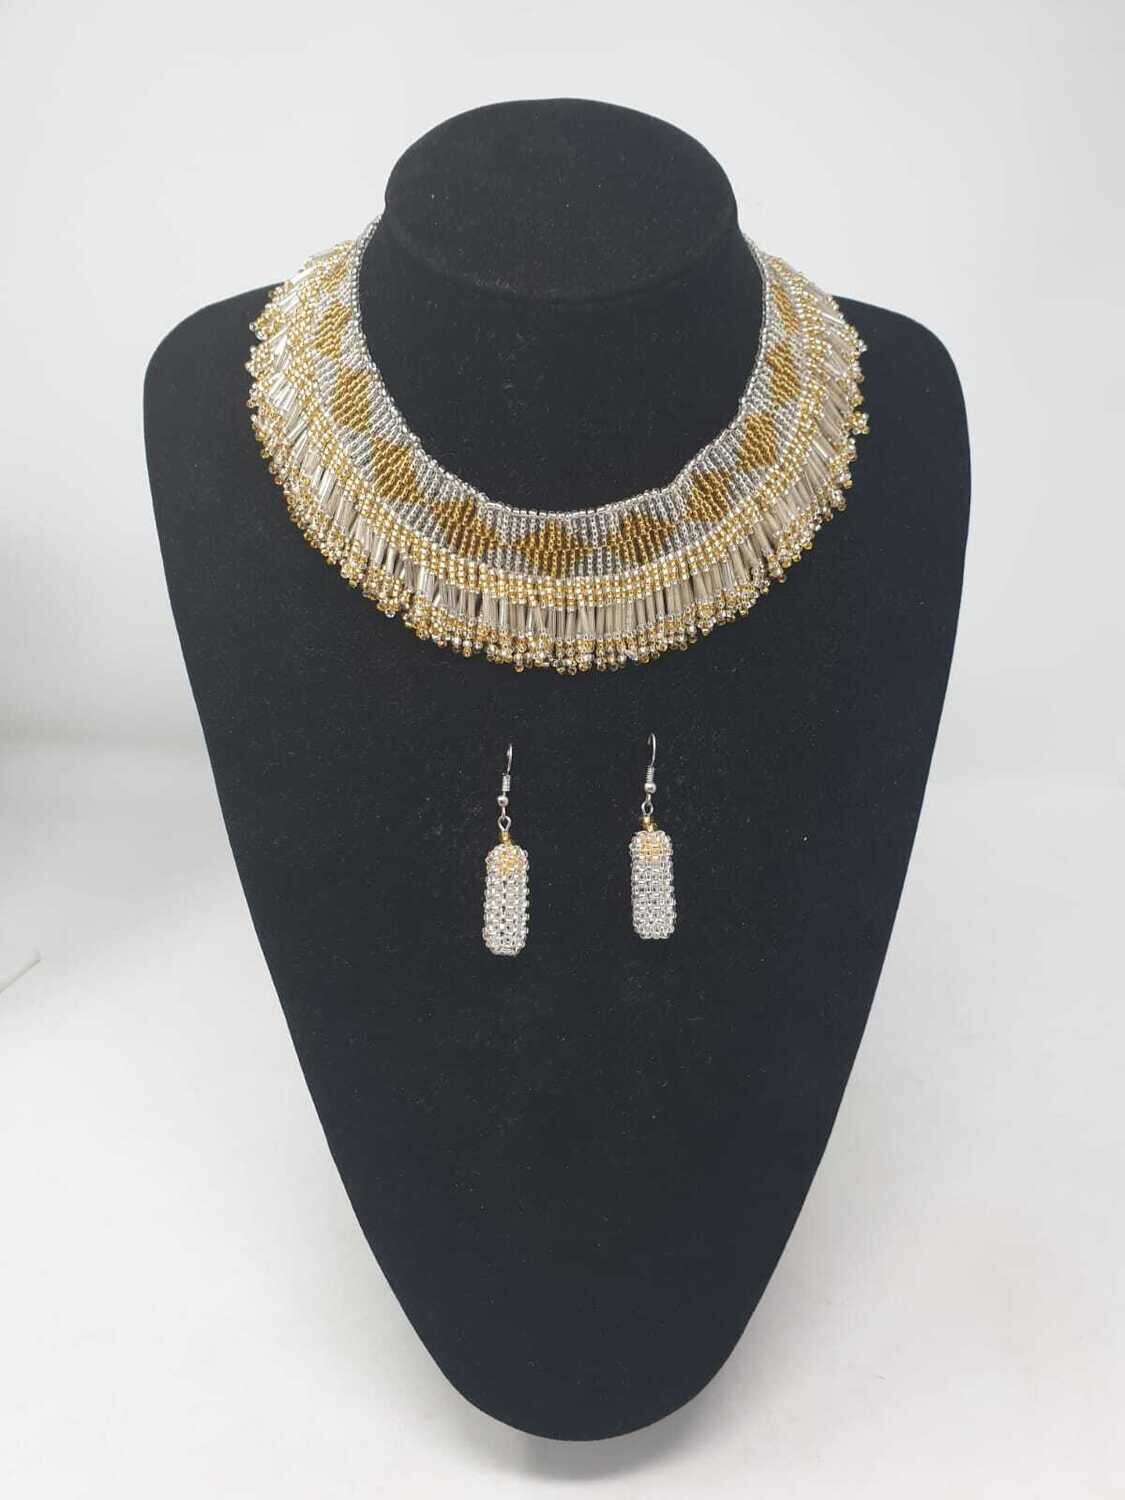 Handbeaded Necklace with Matching Earrings - Gold and Silver